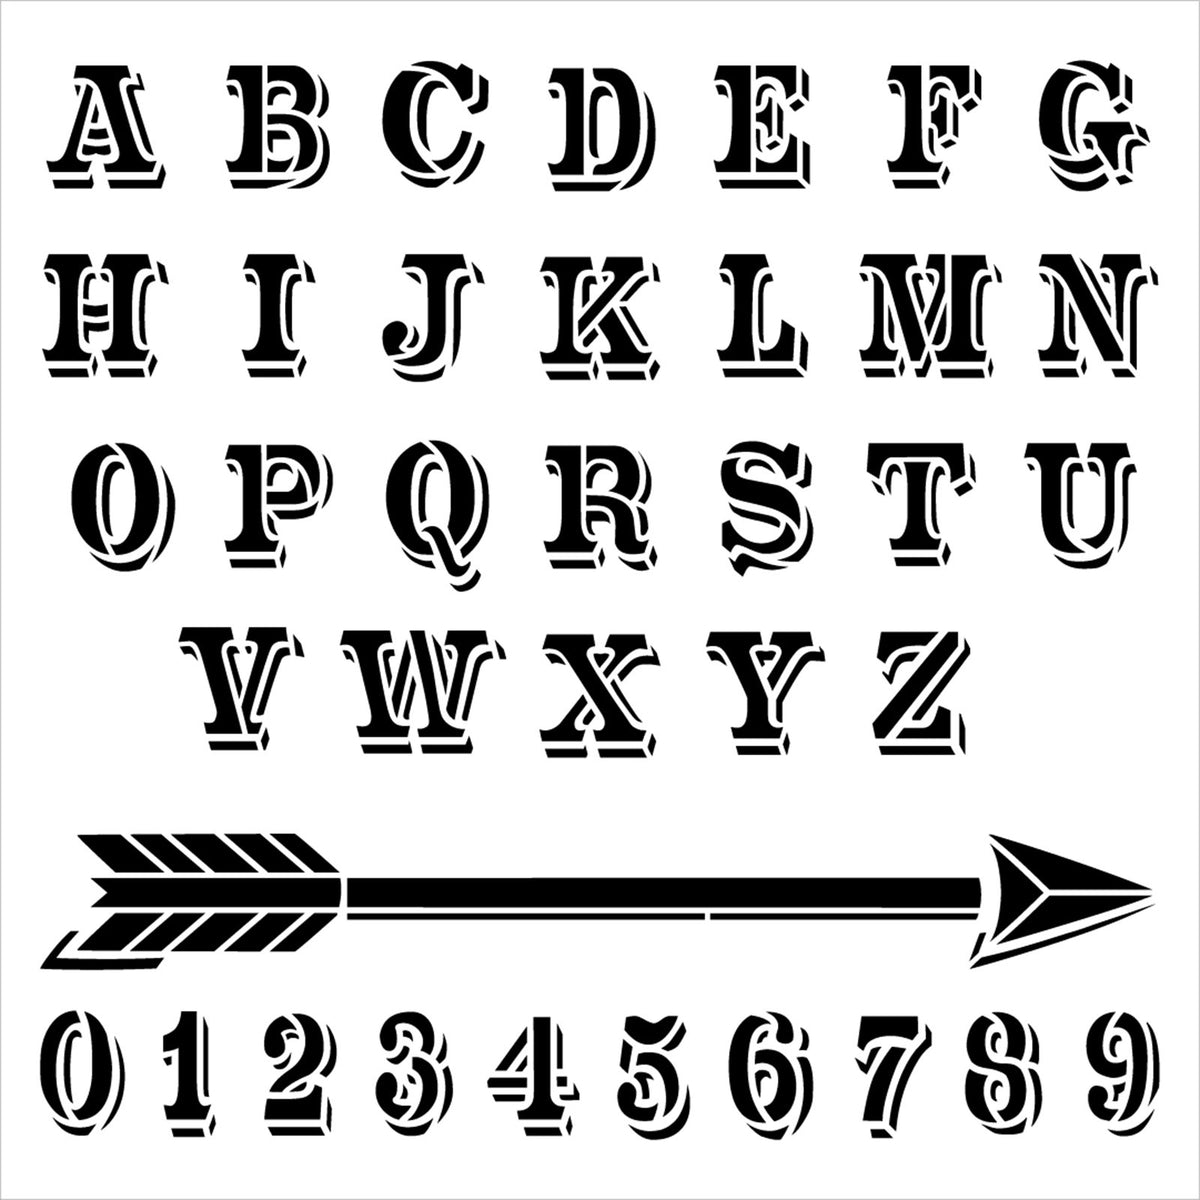 Crafty Typewriter Lettering Stencils by StudioR12, Full Alphabet Stencil  for Journaling, Reusable Template, Select Size, STCL5955